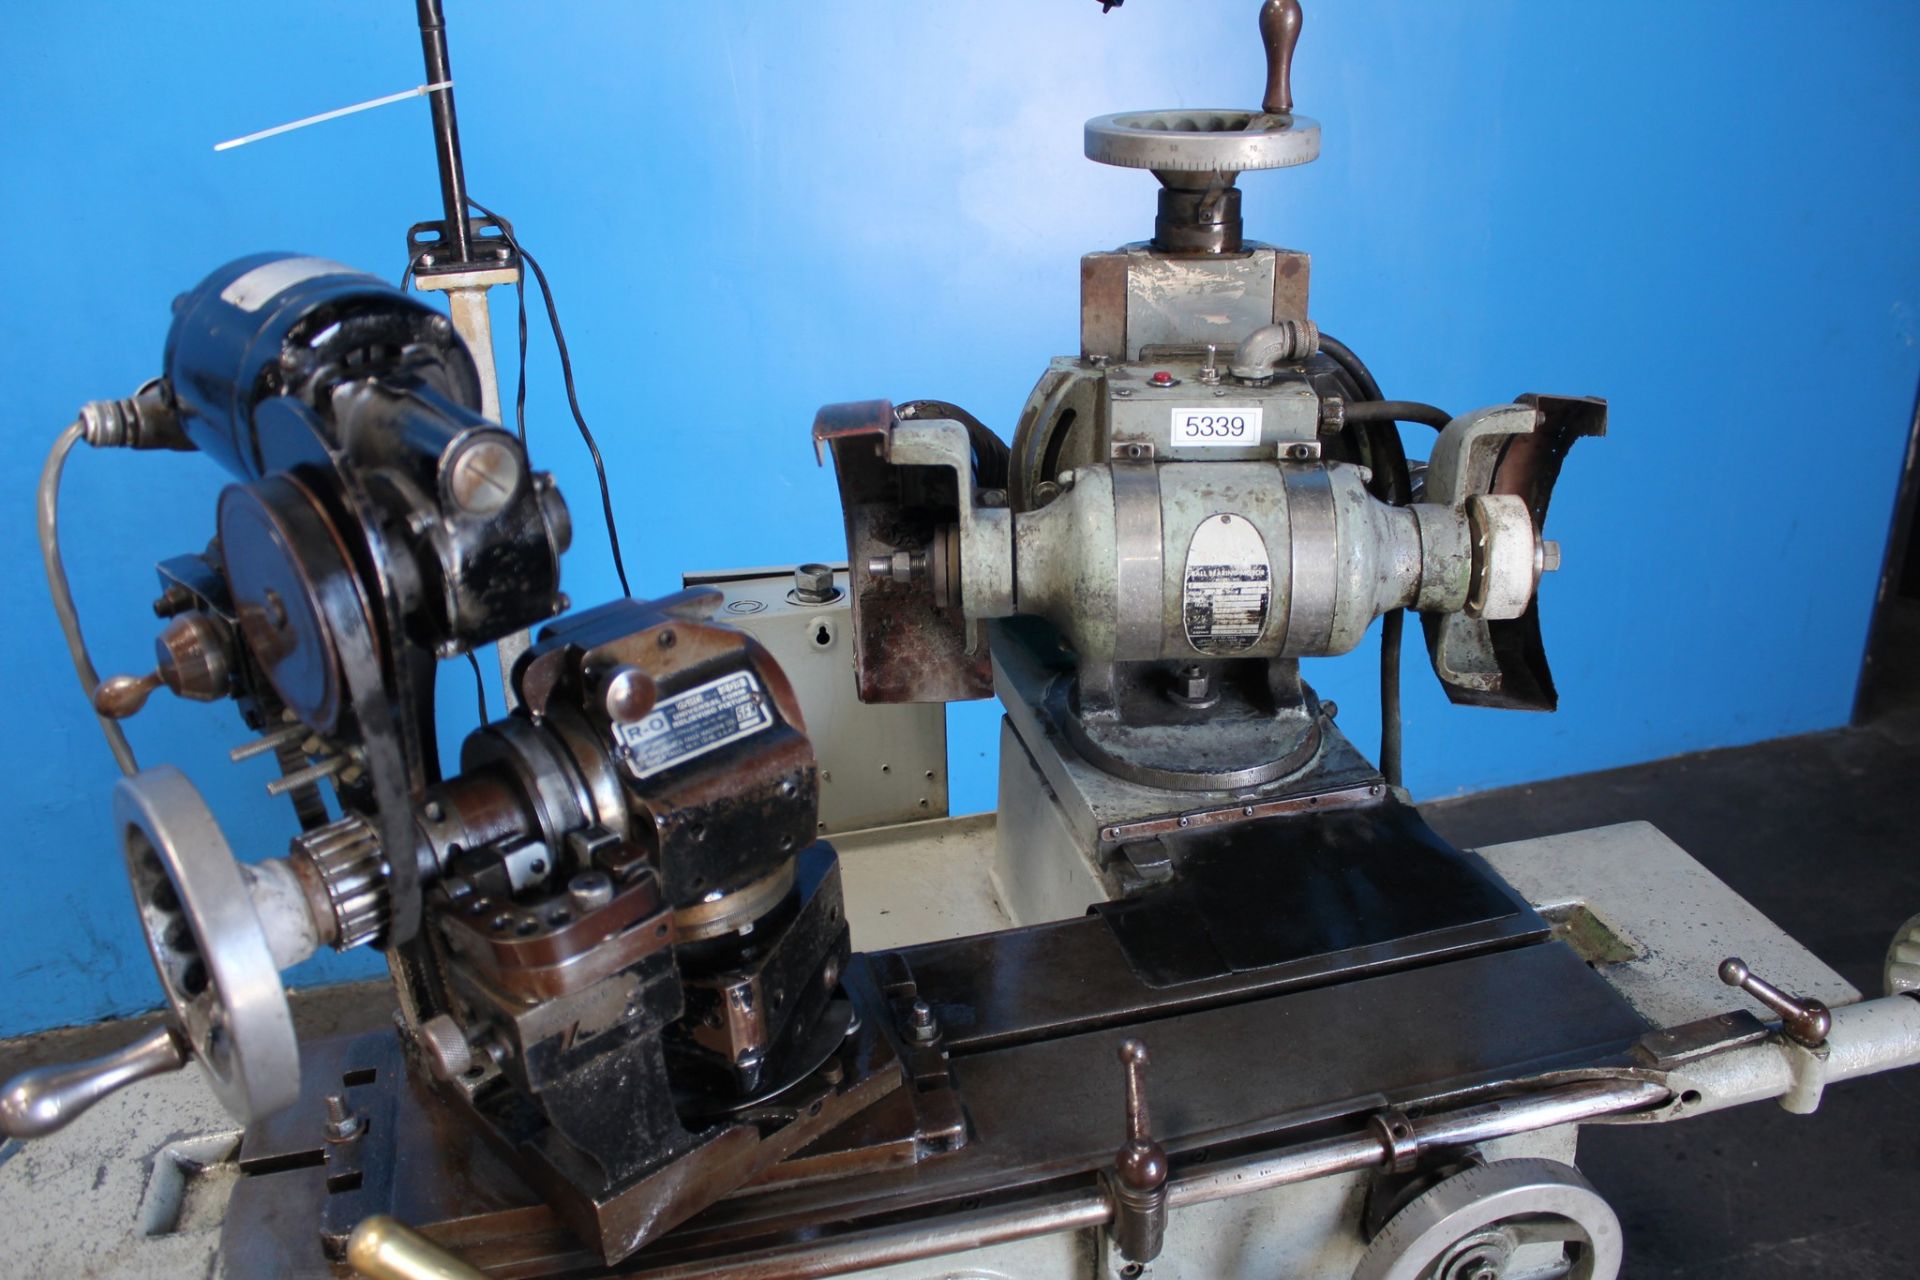 Seneca Falls Form Relieving Grinder, Model 25 R-O, 25RO Universal Form Relieving Fixture, Chucks, - Image 3 of 4